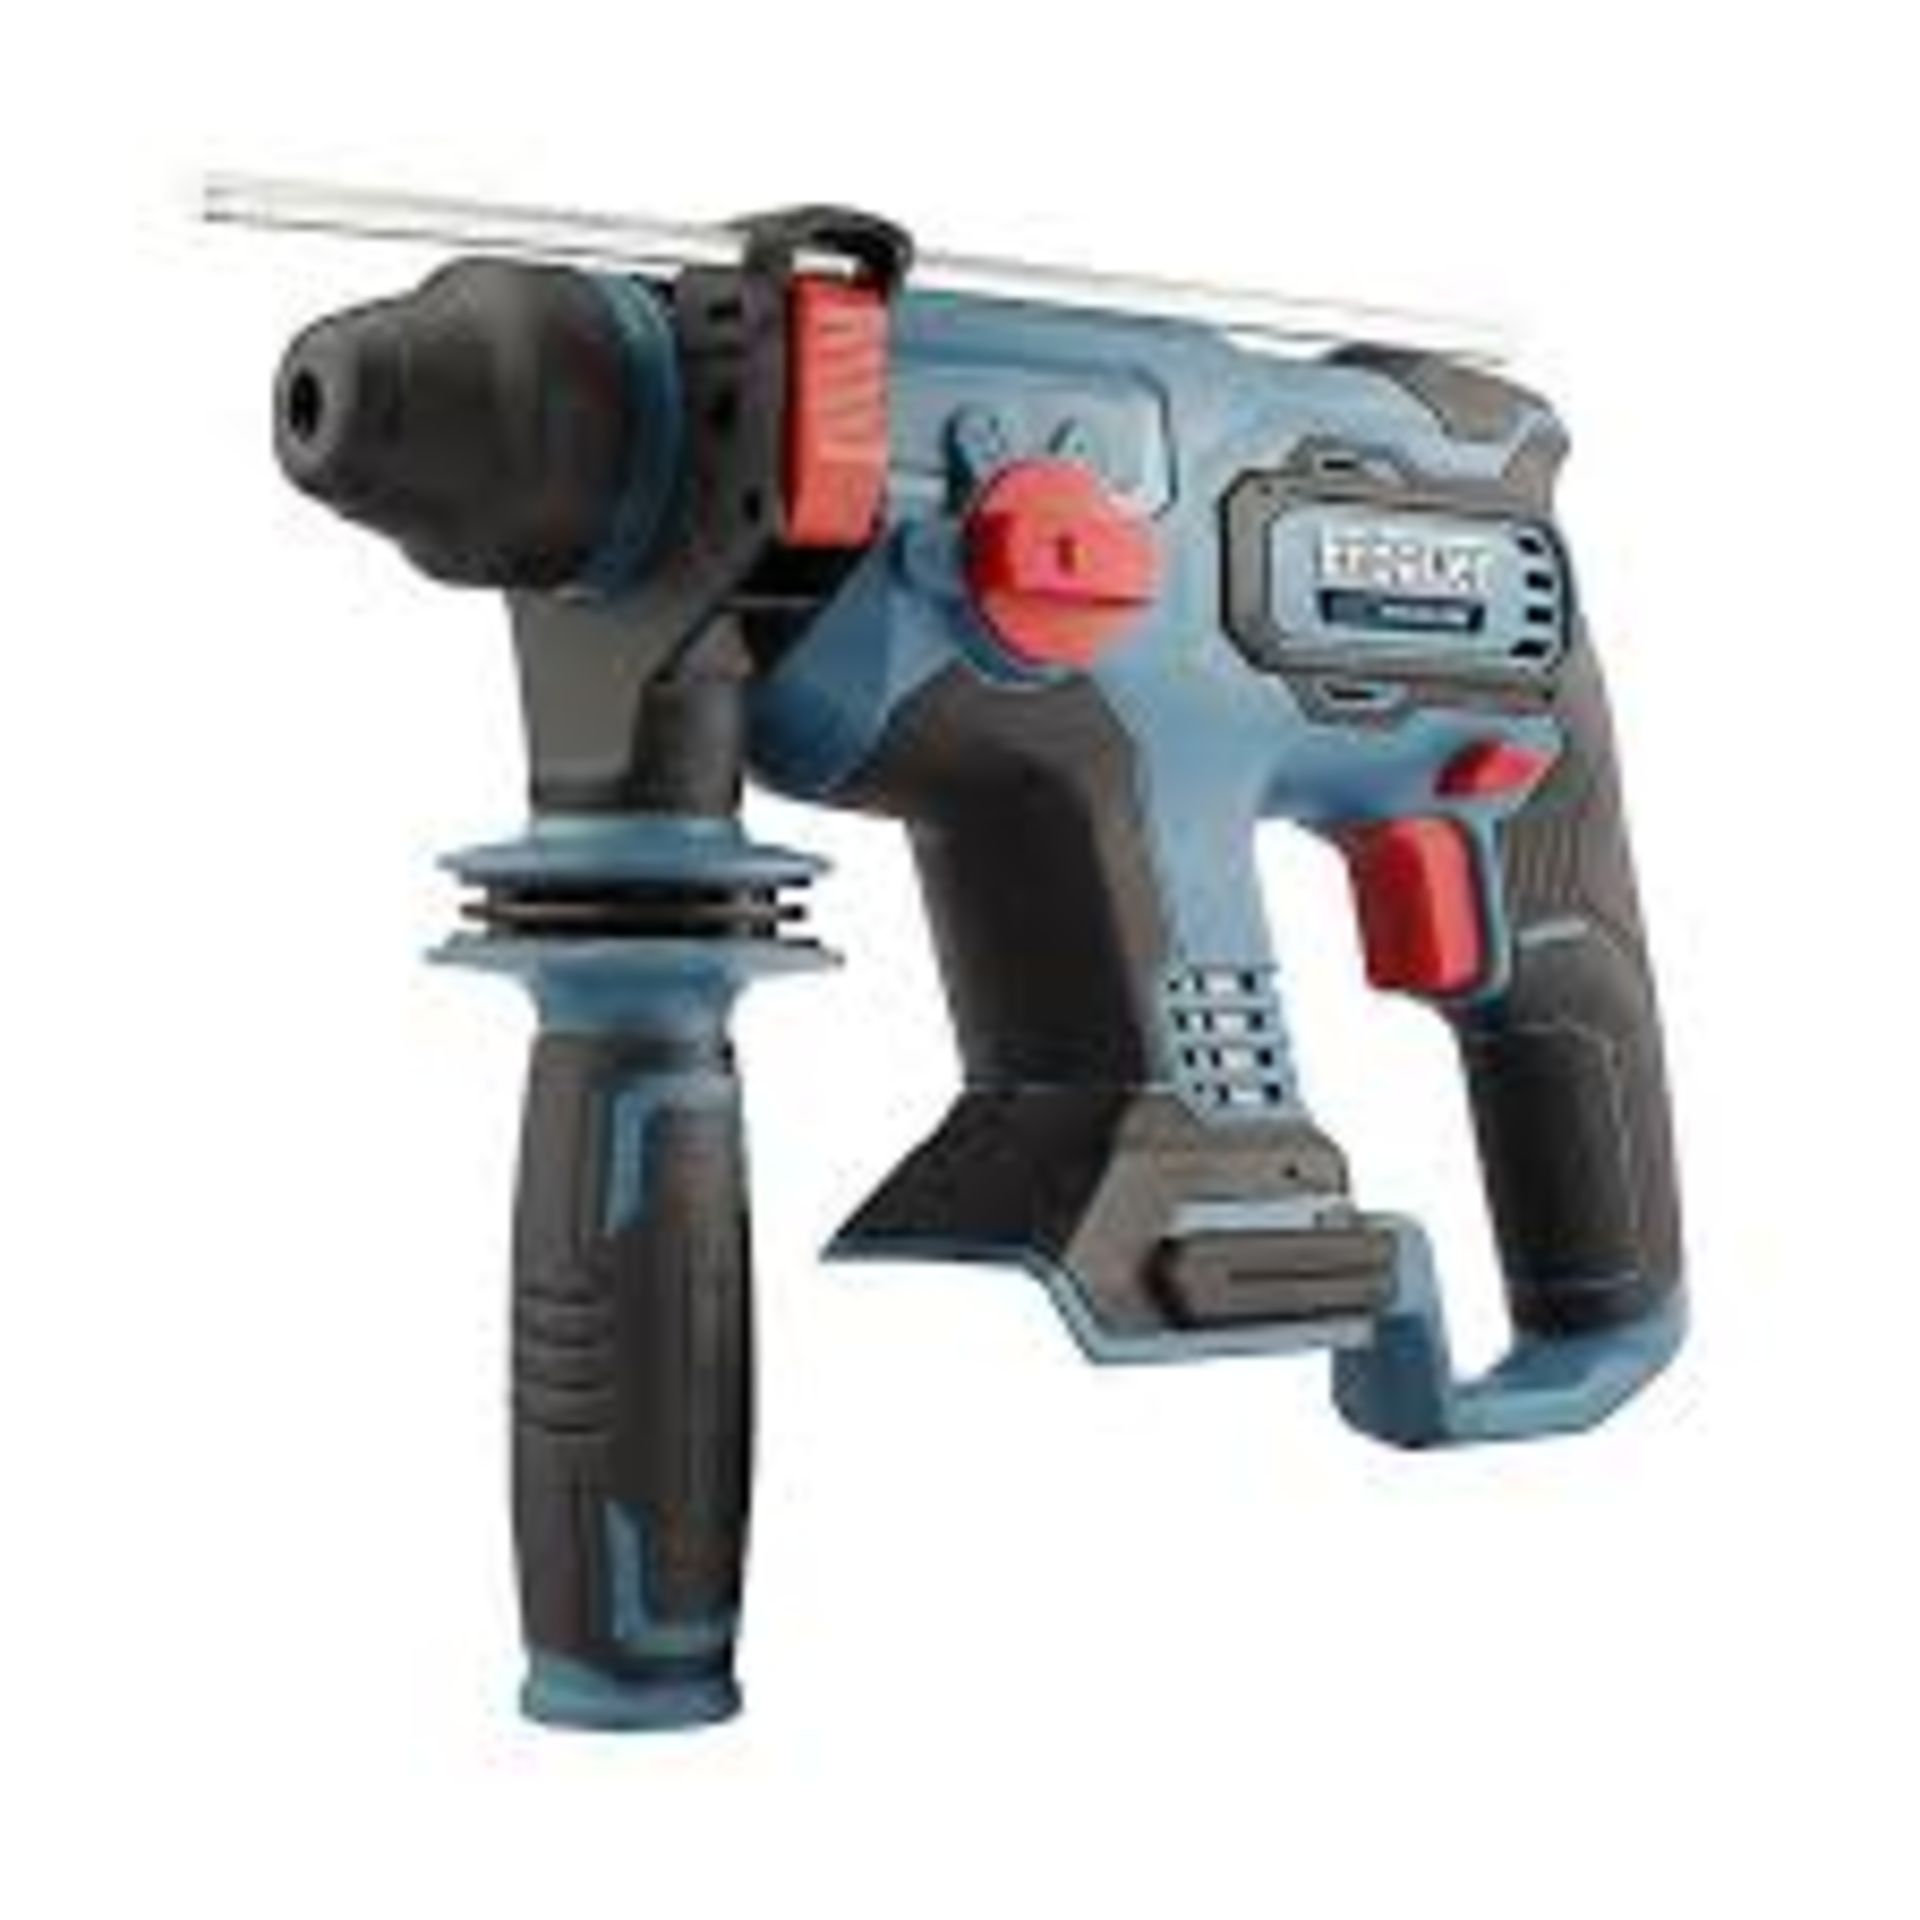 Erbauer EXT 18V Cordless SDS+ drill ERH18-Li - ER45. Erbauer build the power tools you can trust